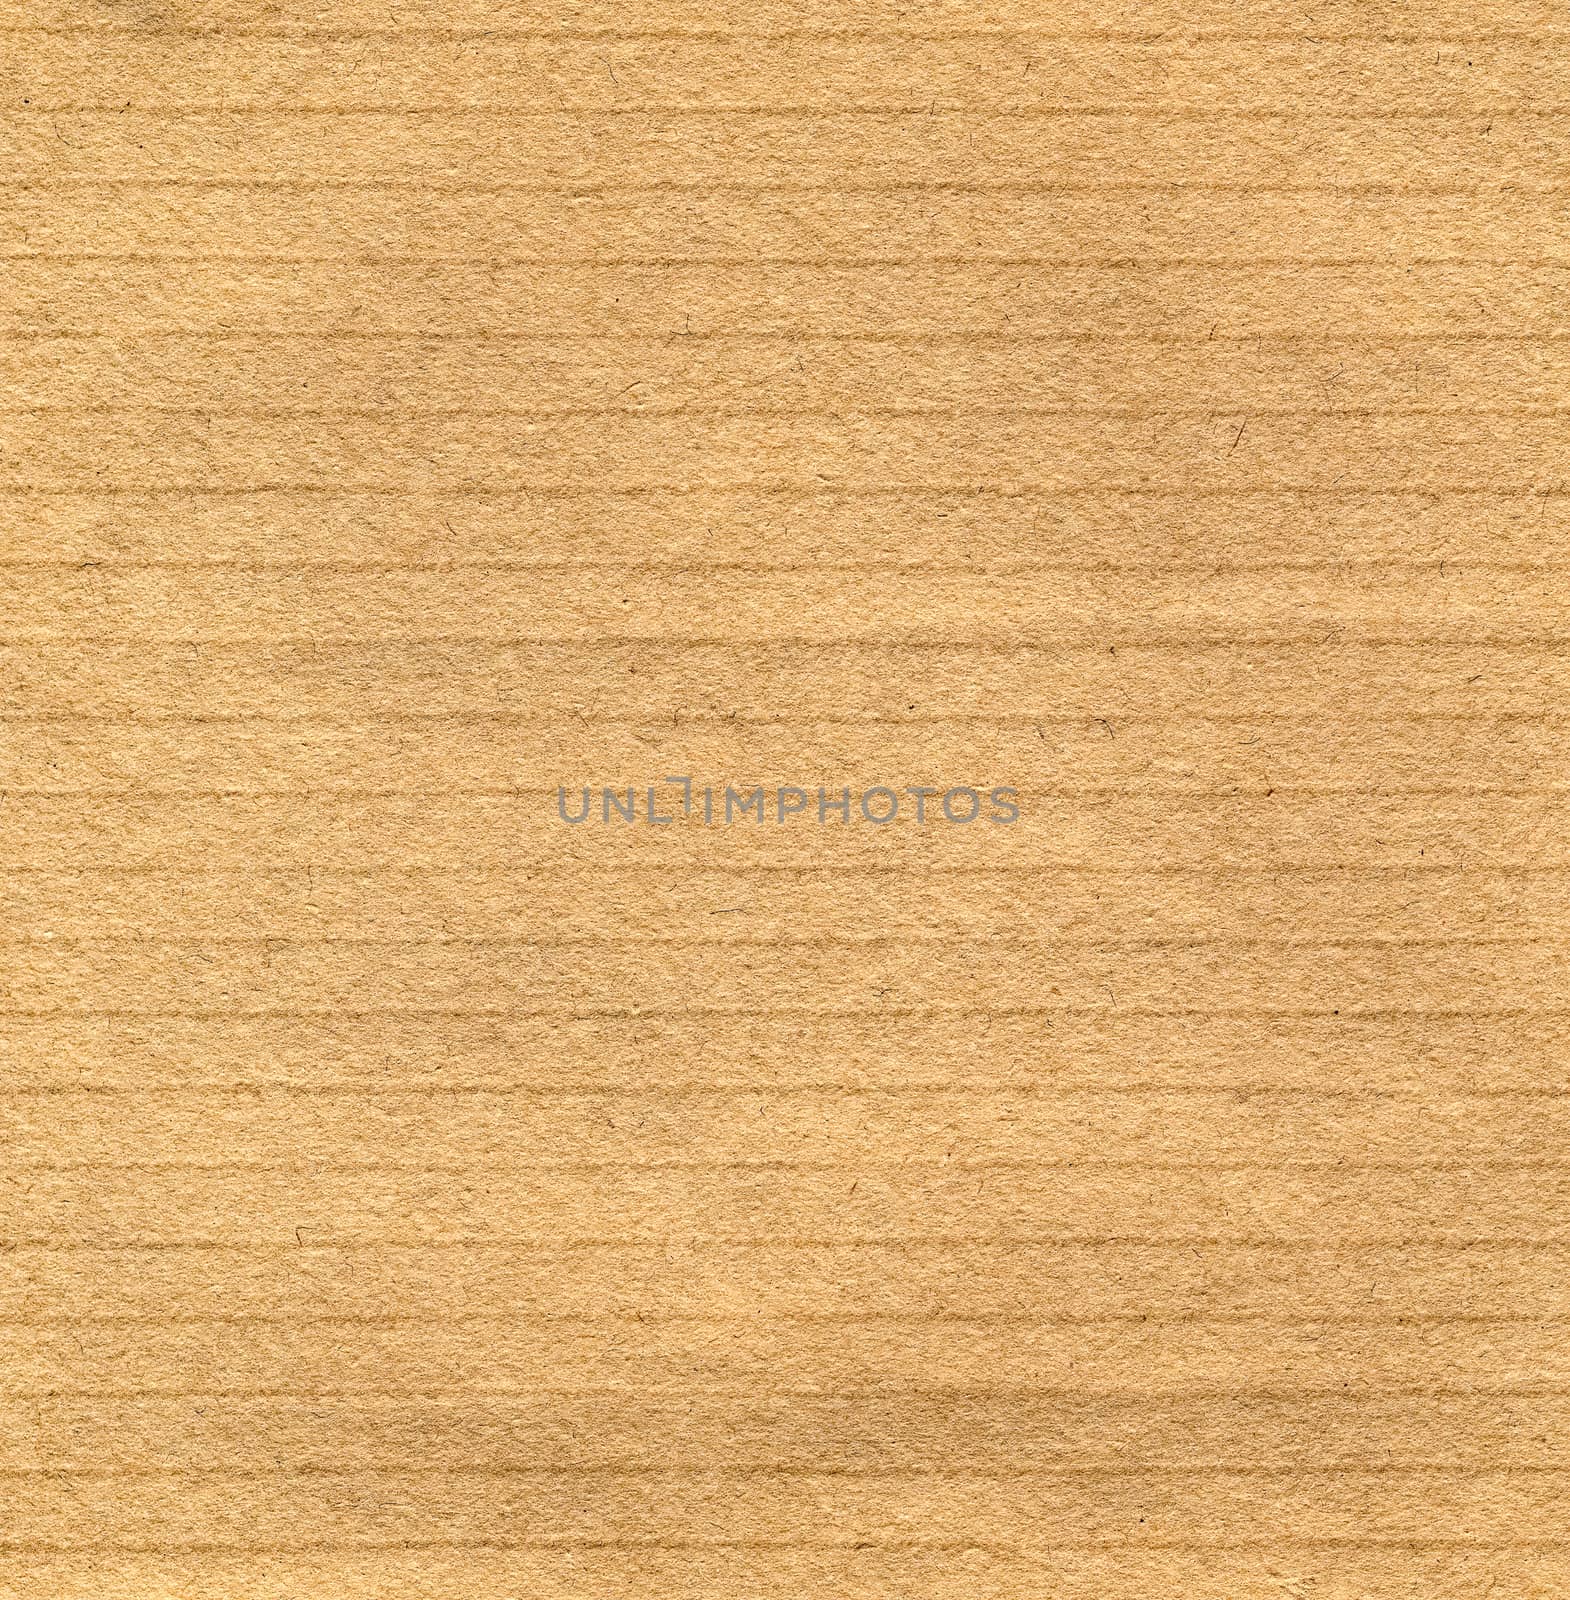 Brown paper texture useful as a vintage grunge background